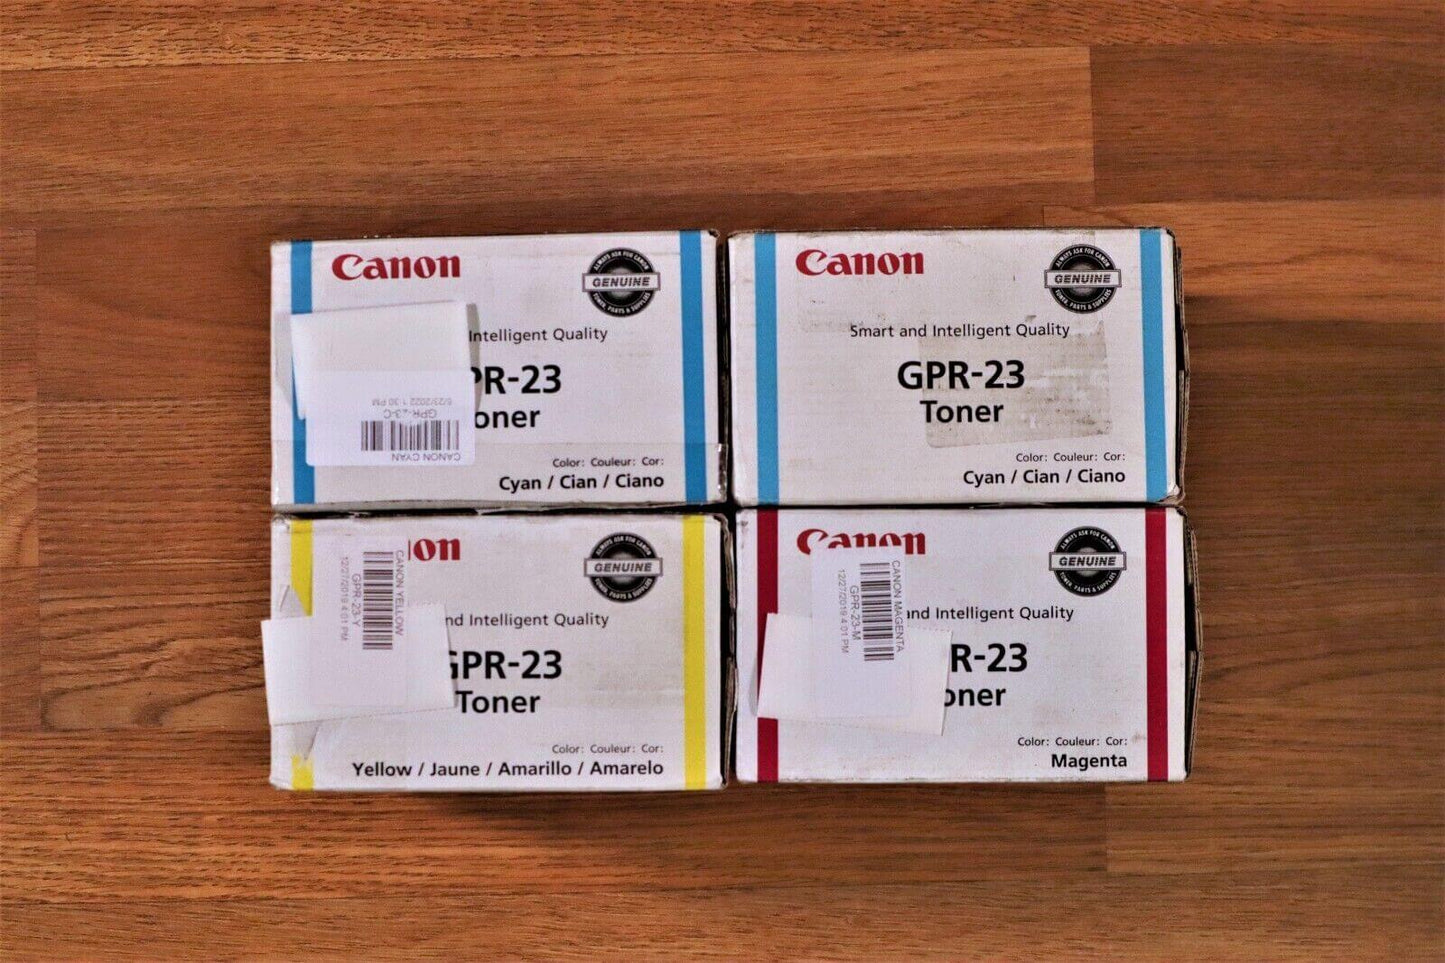 Genuine Canon GPR-23 CCMY Toner Set For iR C2550 C2880 C3080 C3380 Same Day Ship - copier-clearance-center